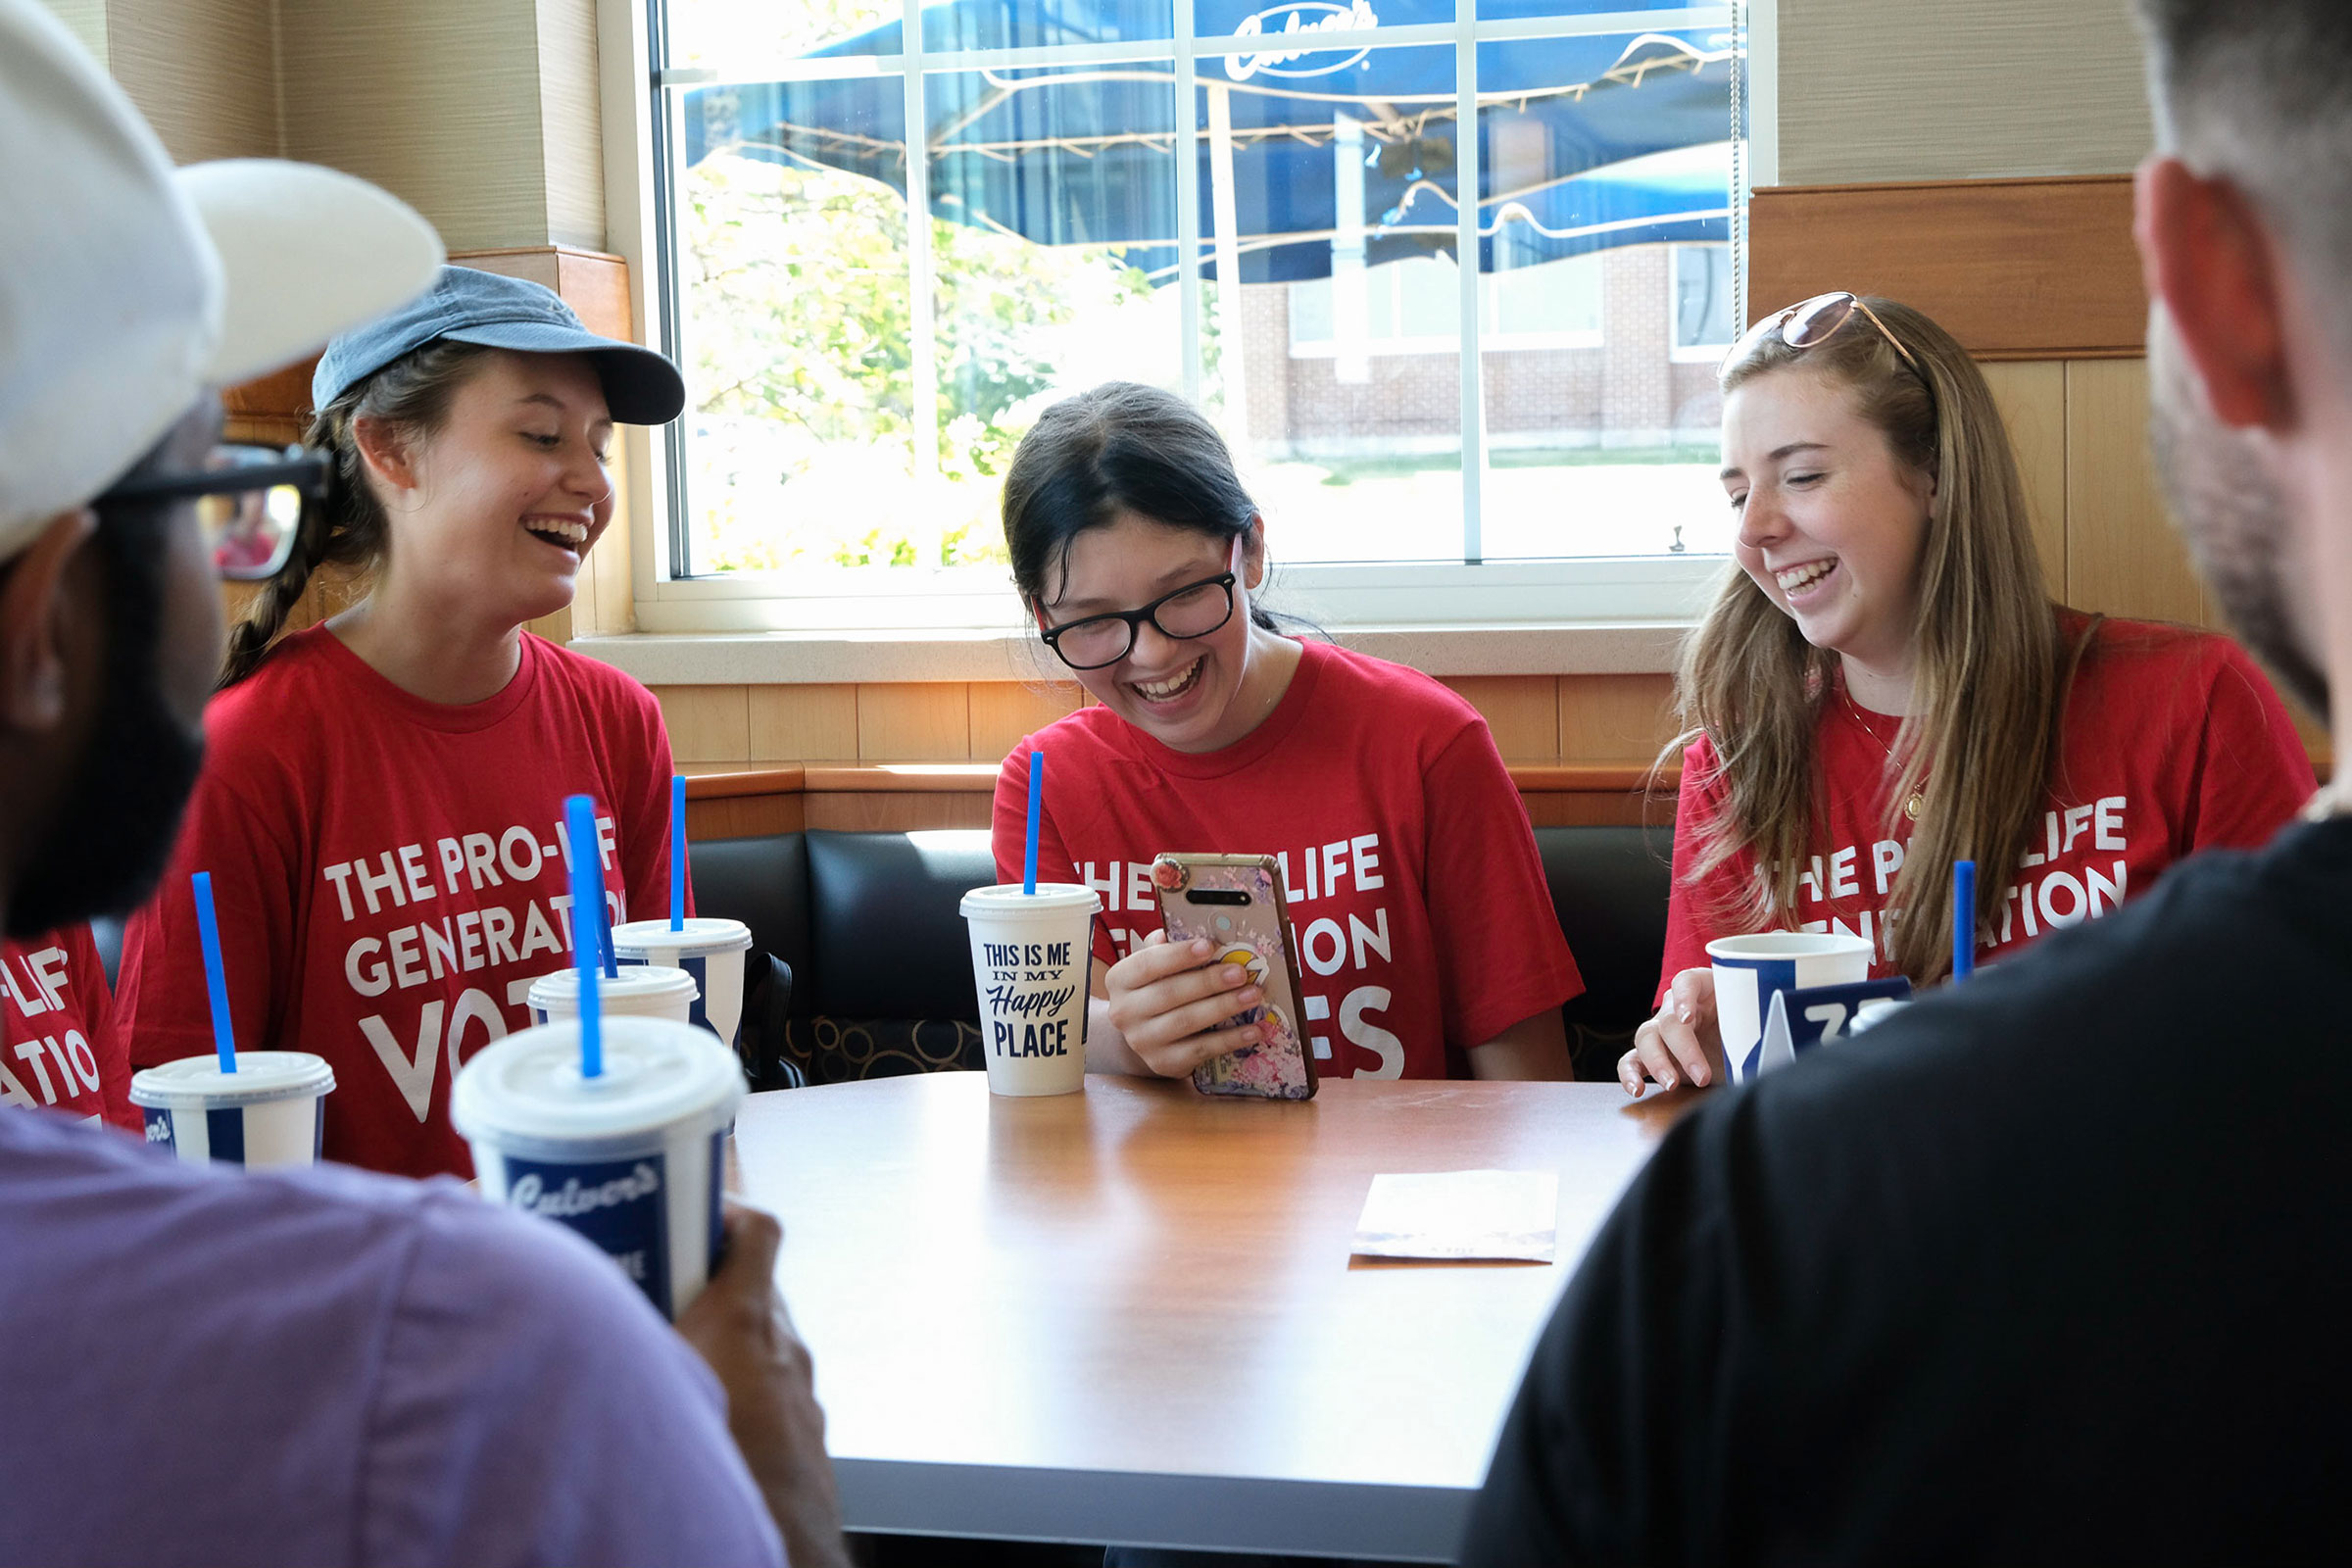 Students for Life of America volunteers take a break for lunch while canvassing in Olathe, Kansas on July 23, 2022. Arin Yoon for TIME.